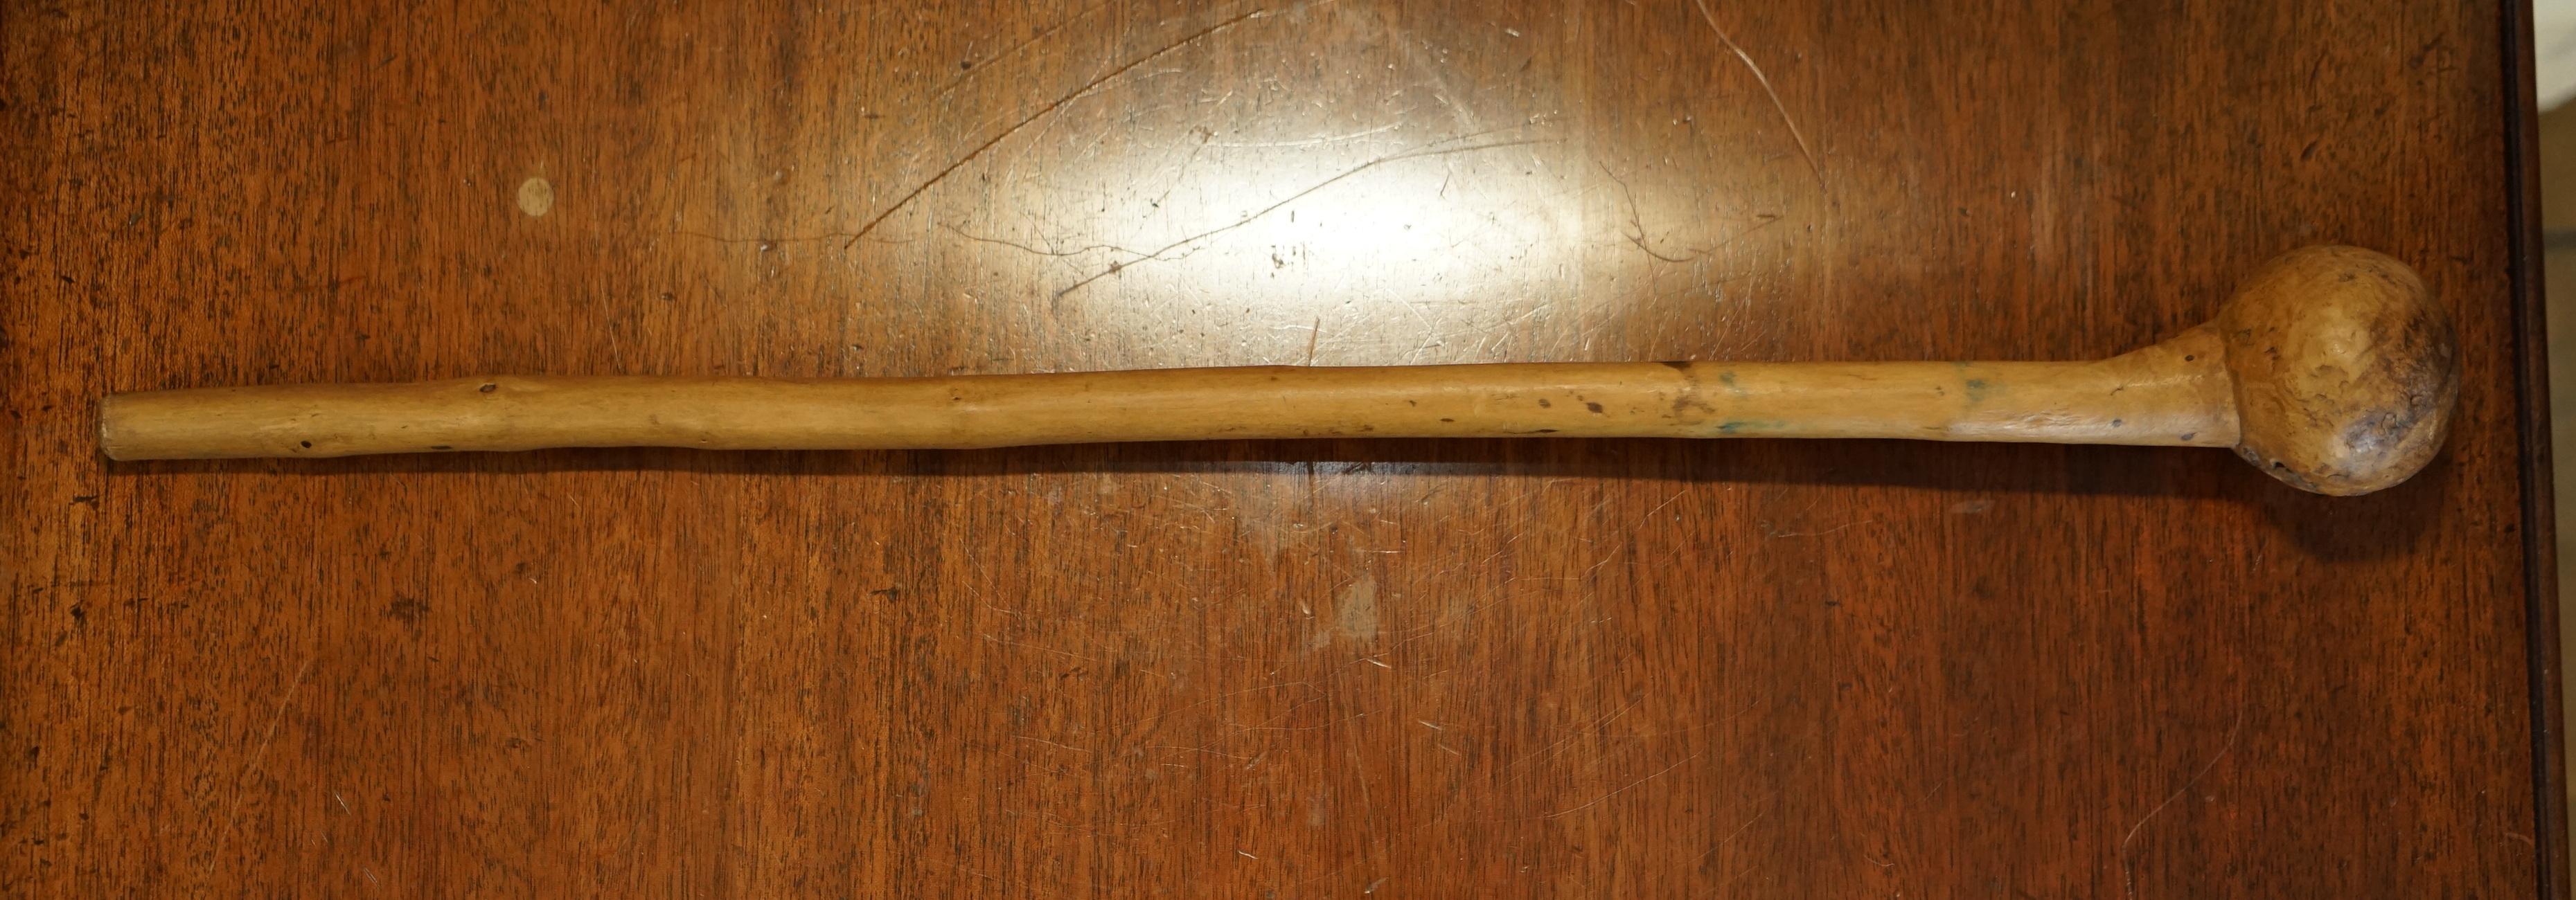 Fine Antique Irish Knobkerrie Stick Very Collectable and Primative One of Two For Sale 12